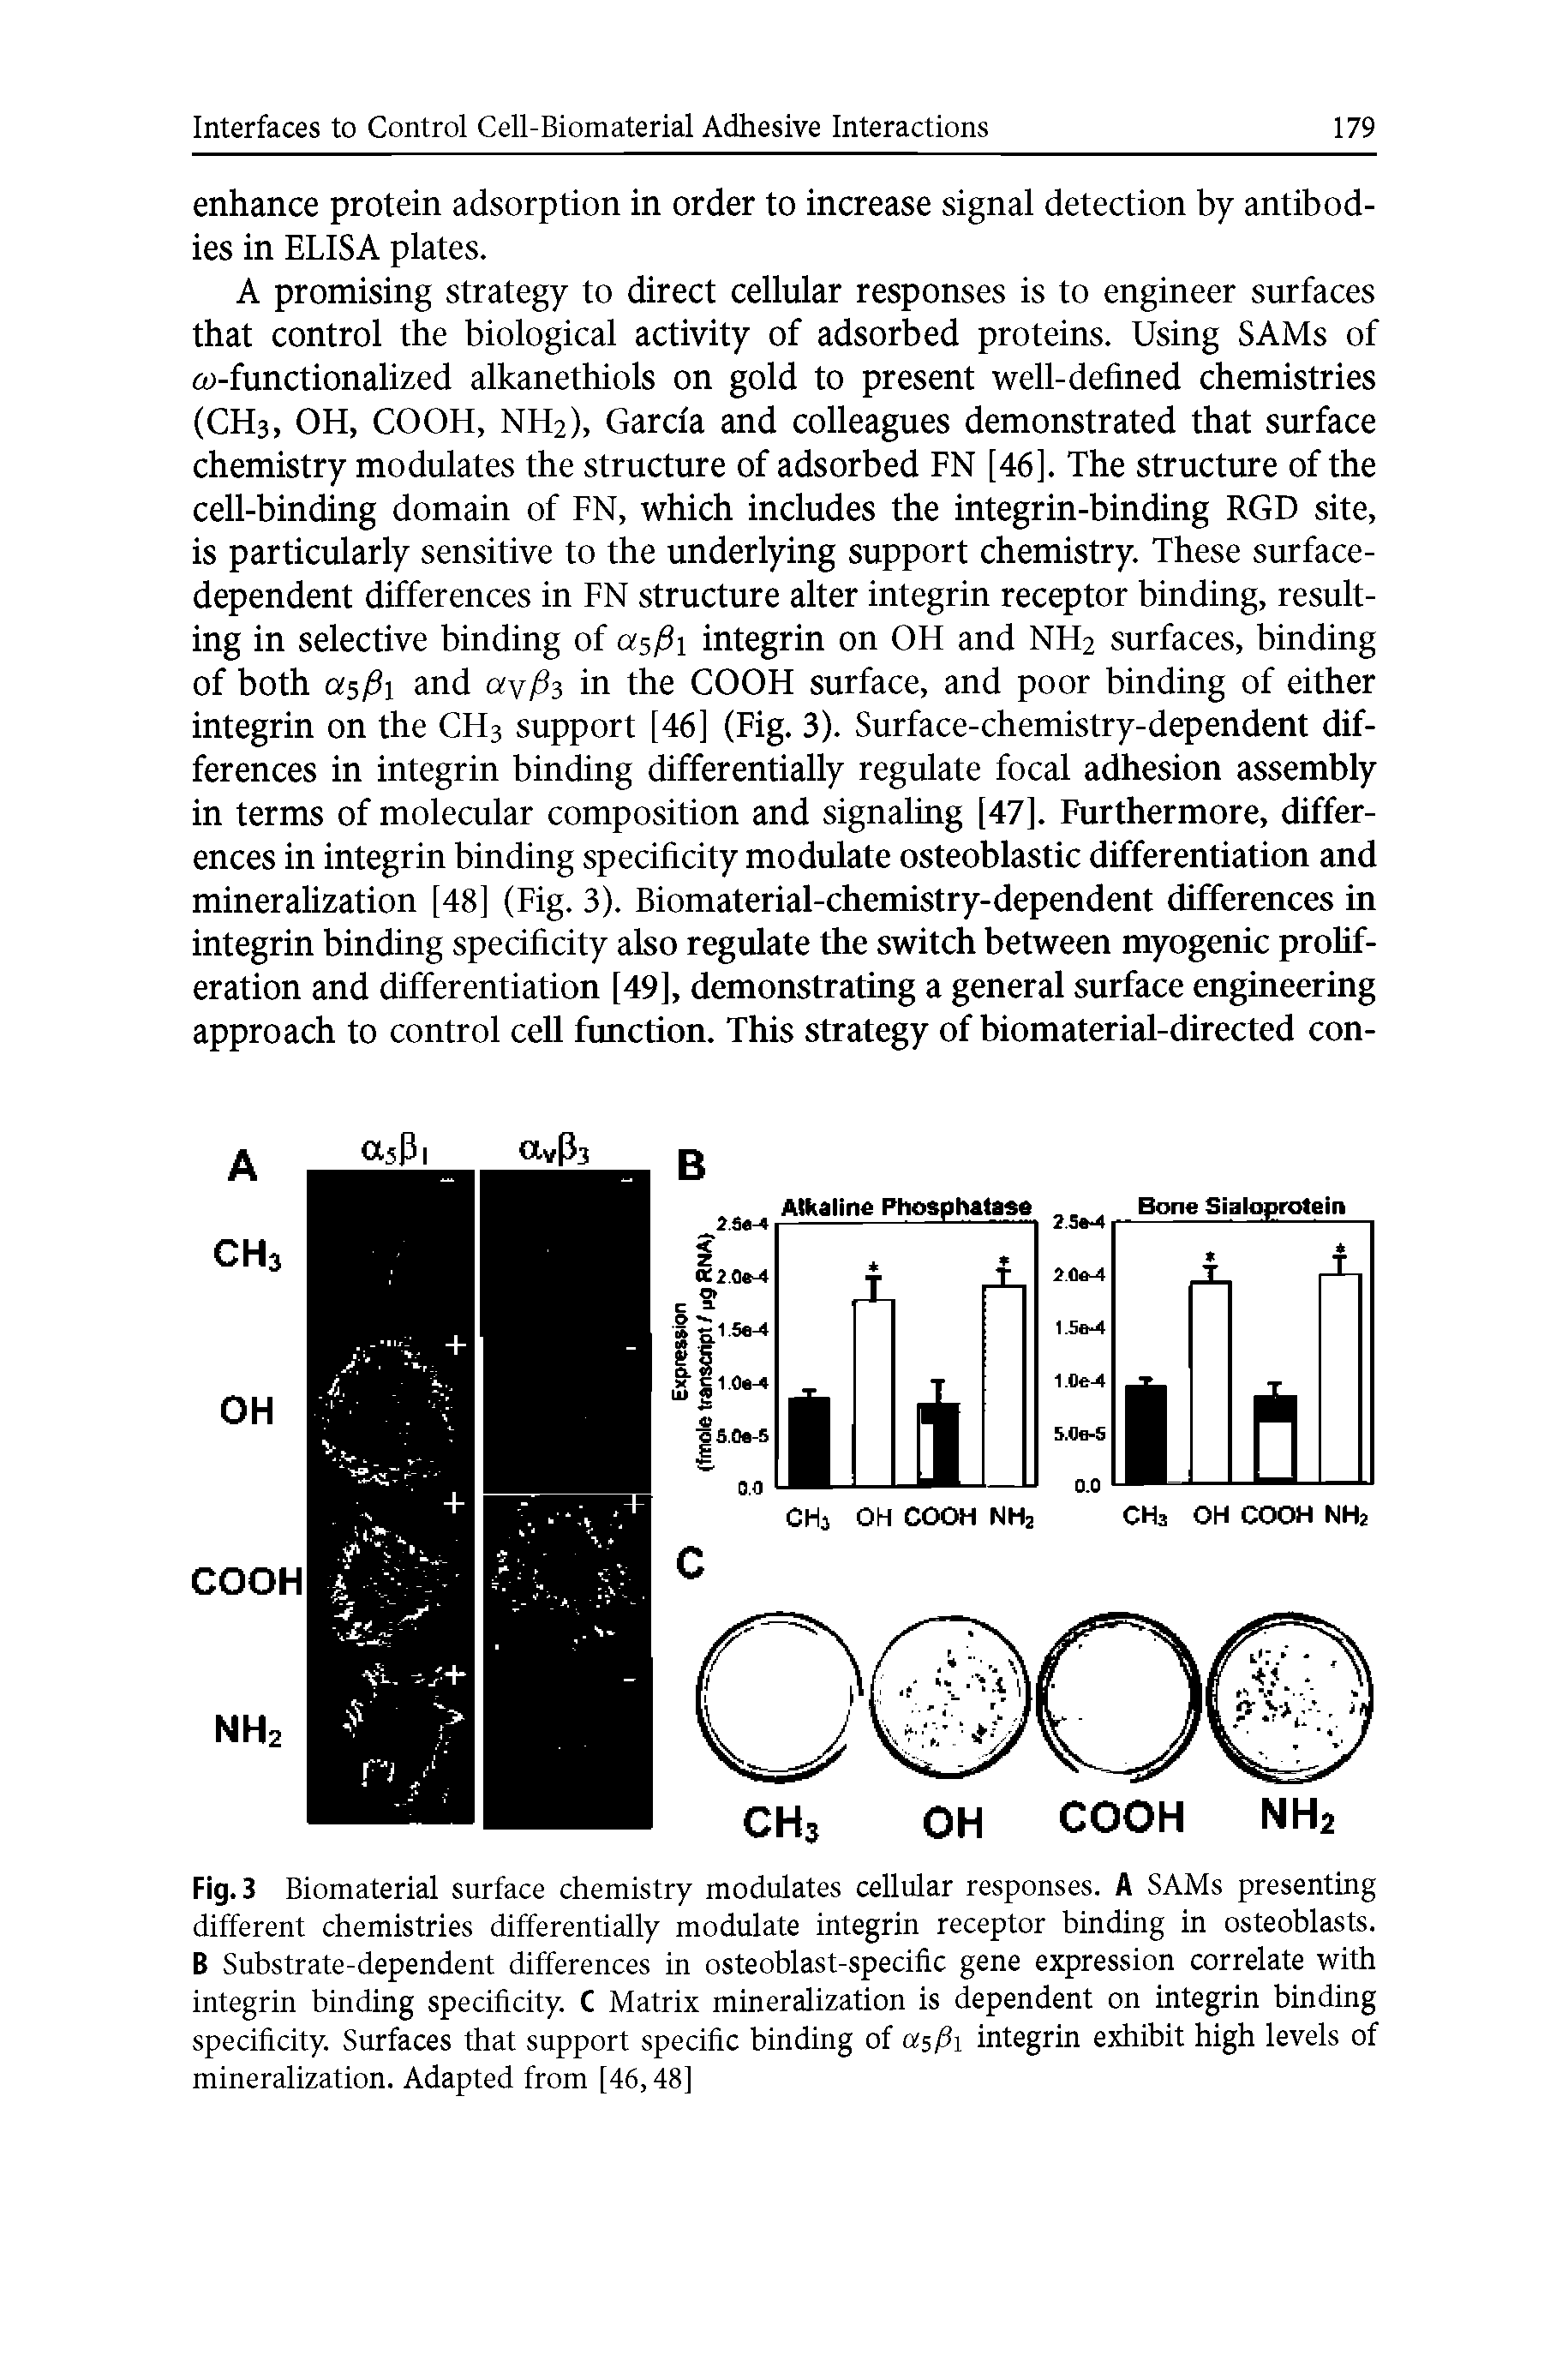 Fig. 3 Biomaterial surface chemistry modulates cellular responses. A SAMs presenting different chemistries differentially modulate integrin receptor binding in osteoblasts. B Substrate-dependent differences in osteoblast-specific gene expression correlate with integrin binding specificity. C Matrix mineralization is dependent on integrin binding specificity. Surfaces that support specific binding of asfii integrin exhibit high levels of mineralization. Adapted from [46,48]...